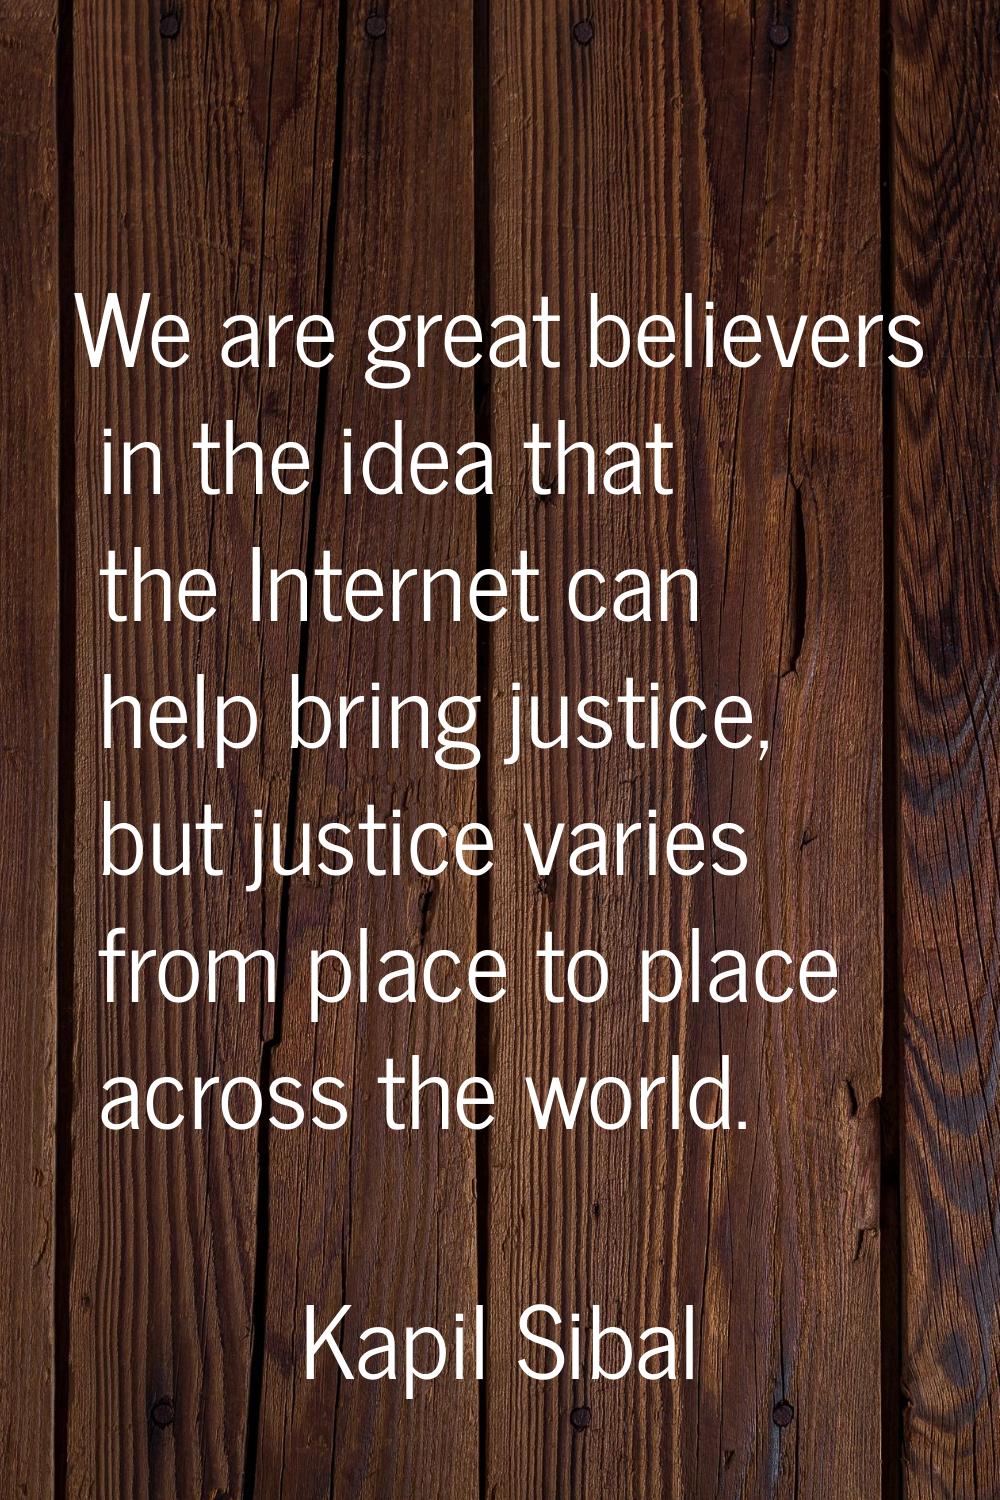 We are great believers in the idea that the Internet can help bring justice, but justice varies fro